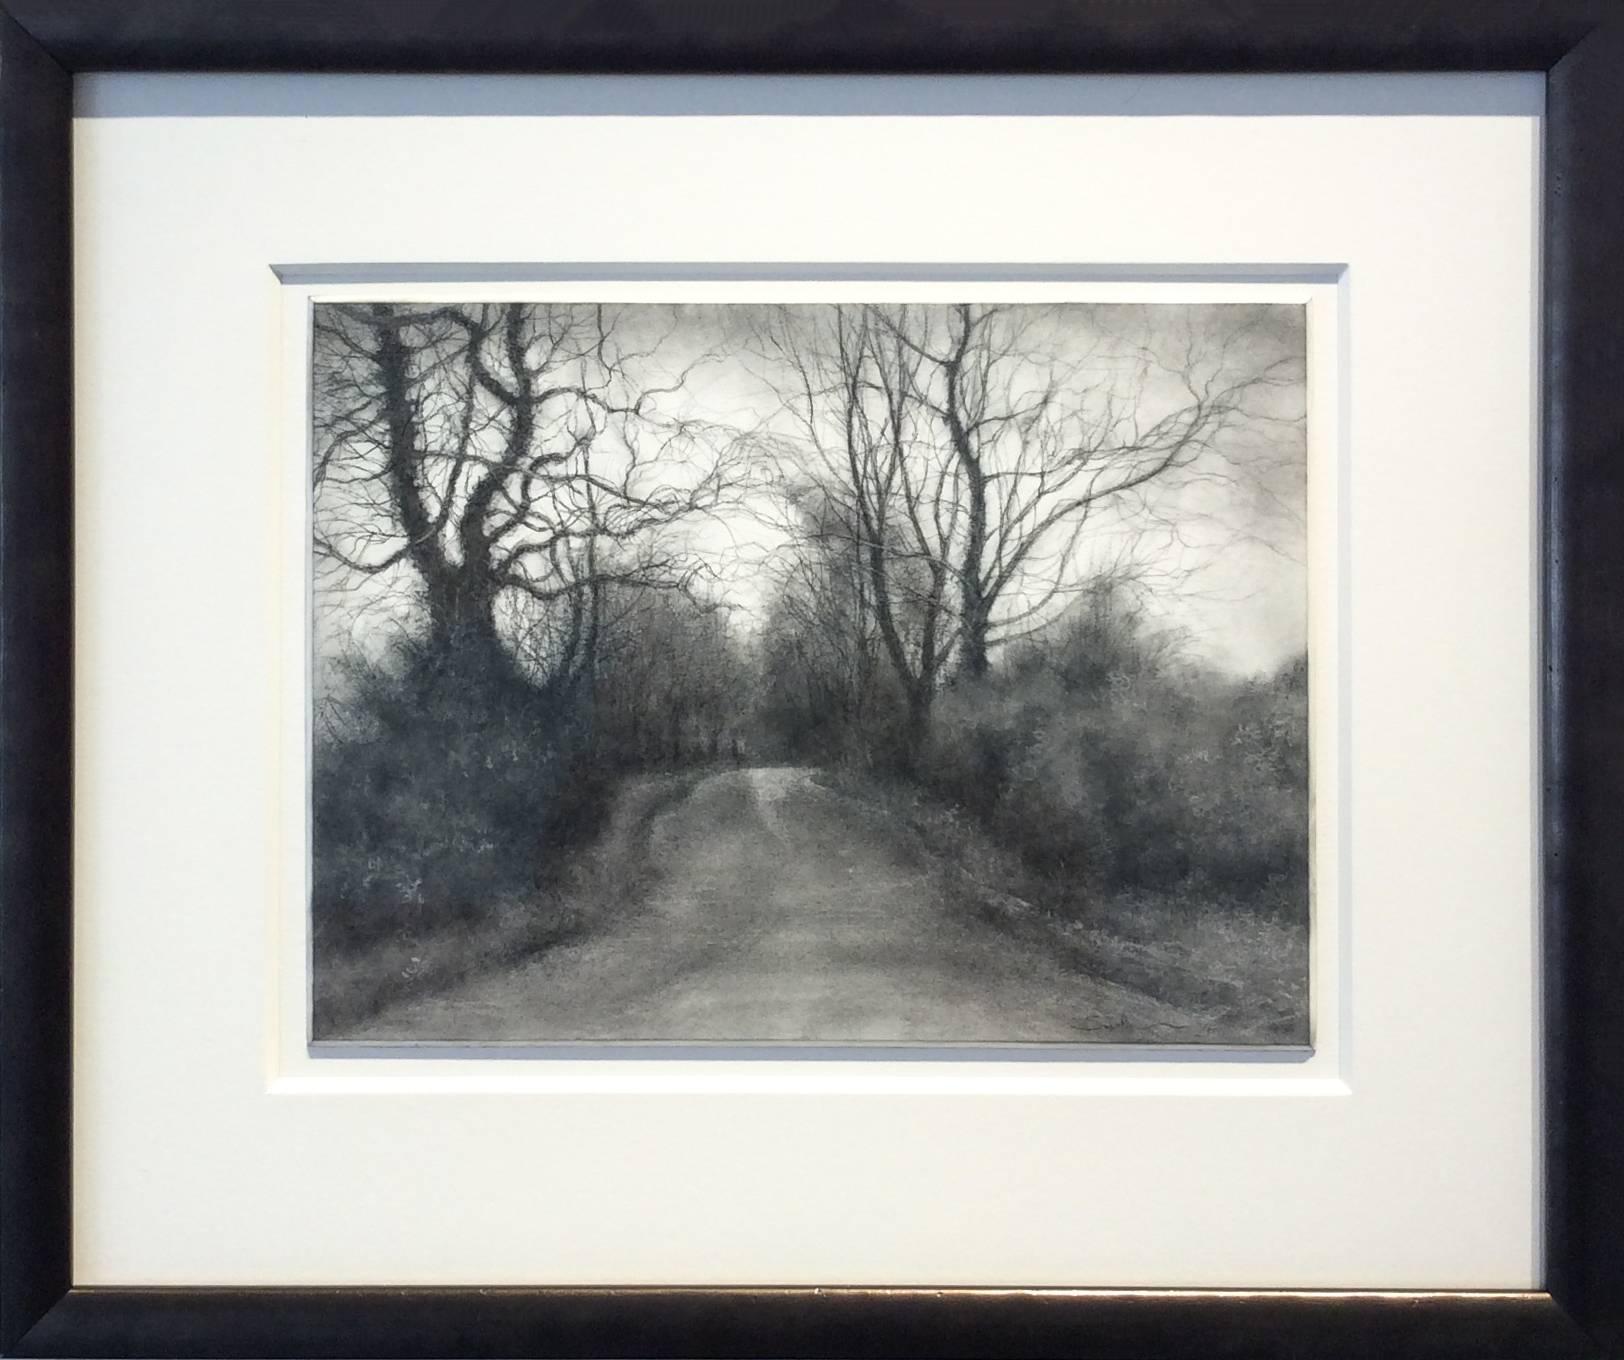 Sue Bryan Landscape Art - Rural Road 7 (Realistic Black & White Charcoal Drawing of Country Road & Trees)